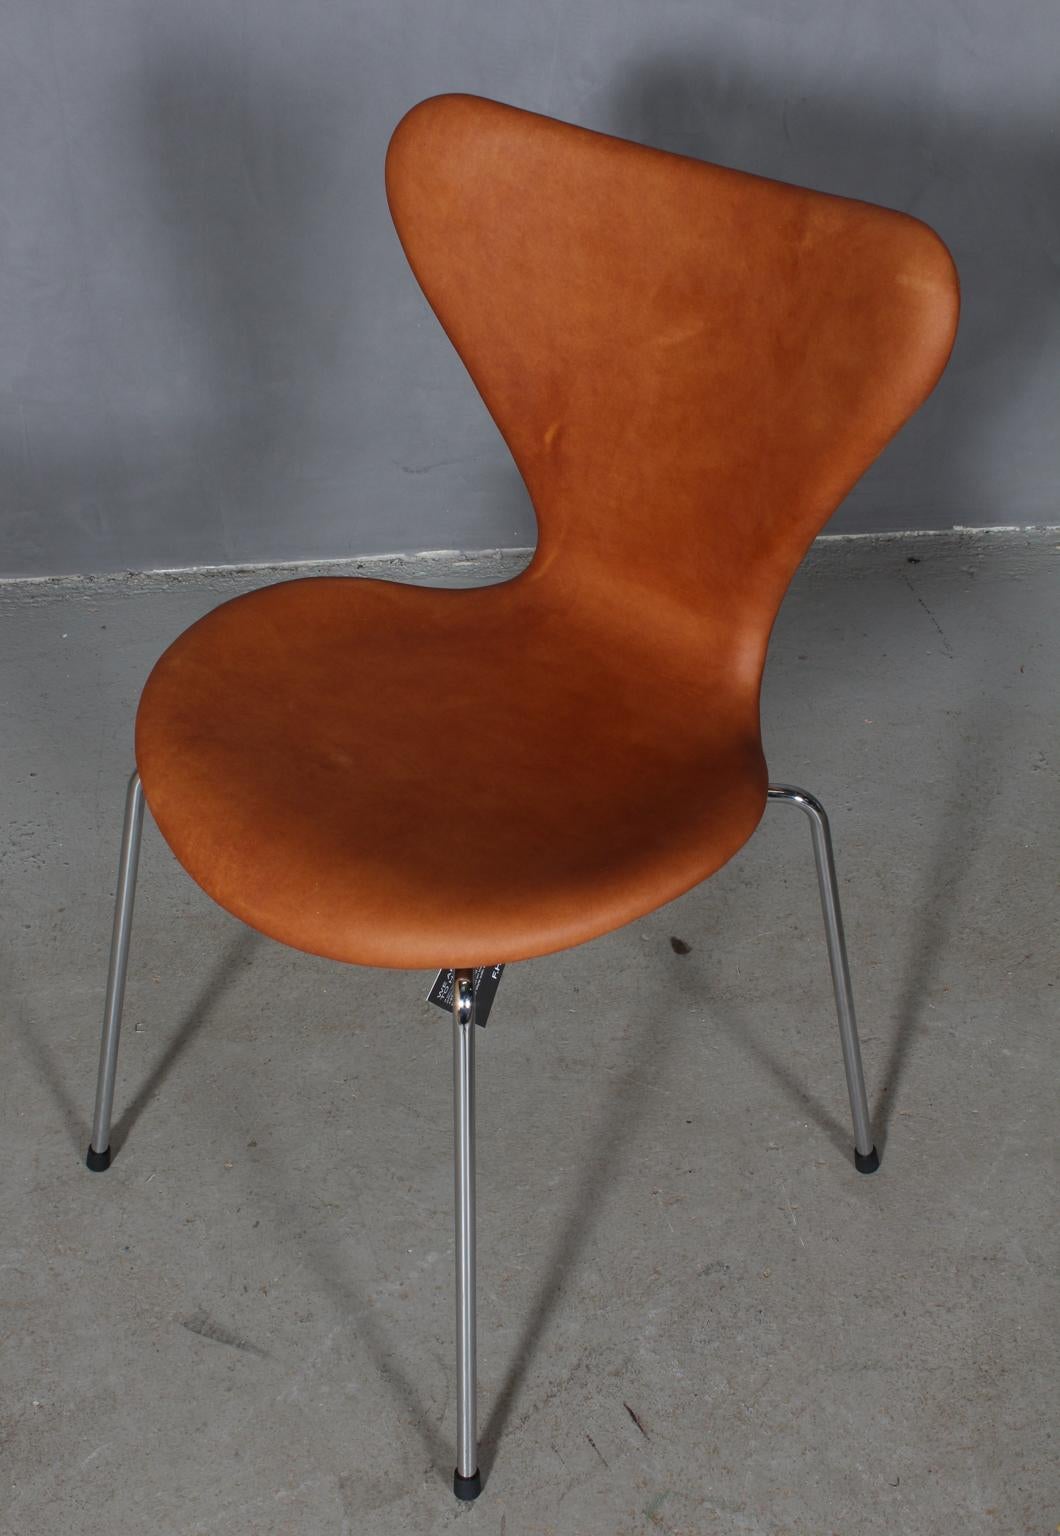 Arne Jacobsen dining chair new upholstered with vintage tan aniline leather.

Base of chrome steel tube.

Model 3107 Syveren, made by Fritz Hansen.

New shell and base reupholsterd, with certificate.